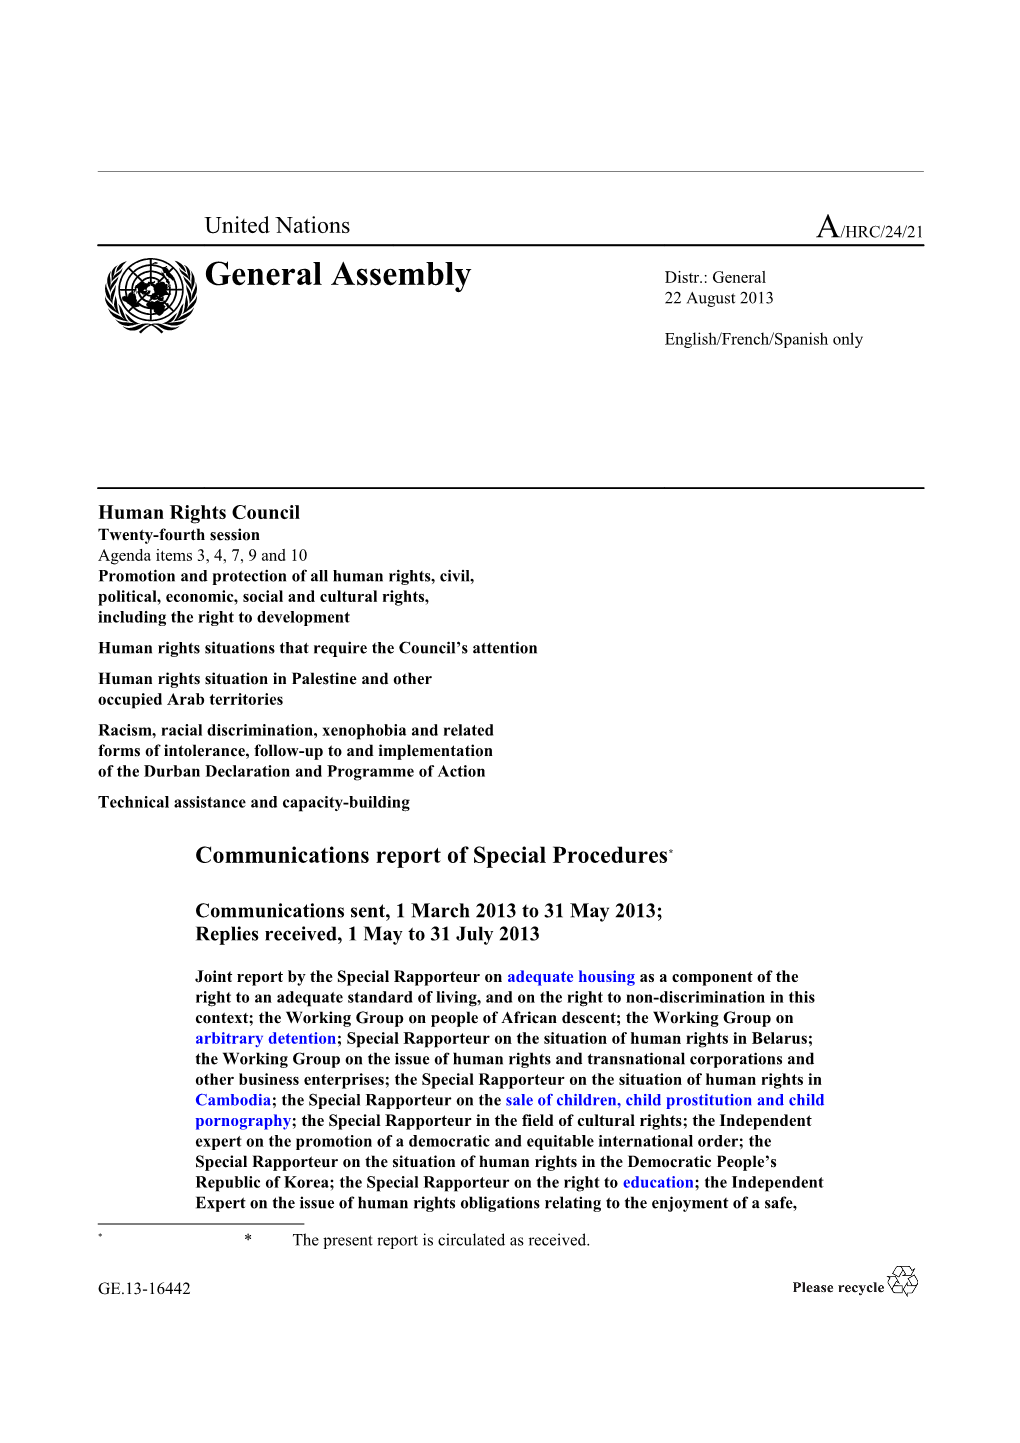 Communications Report of Special Procedures - Communications Sent, 1 March 2013 to 31 May